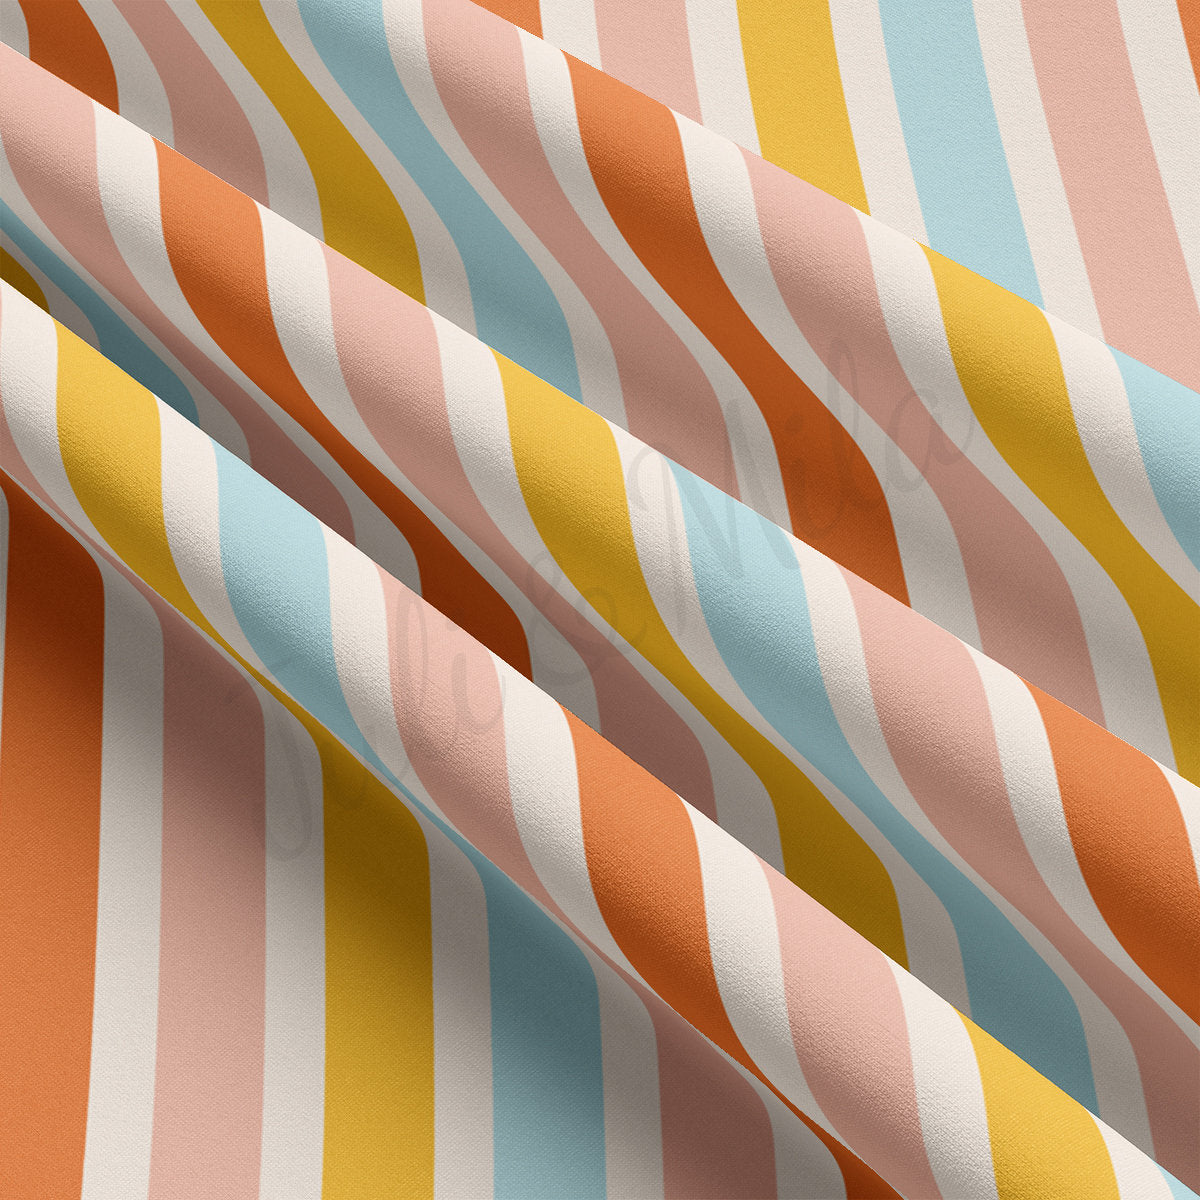 DBP Fabric Double Brushed Polyester DBP2524 Stripes